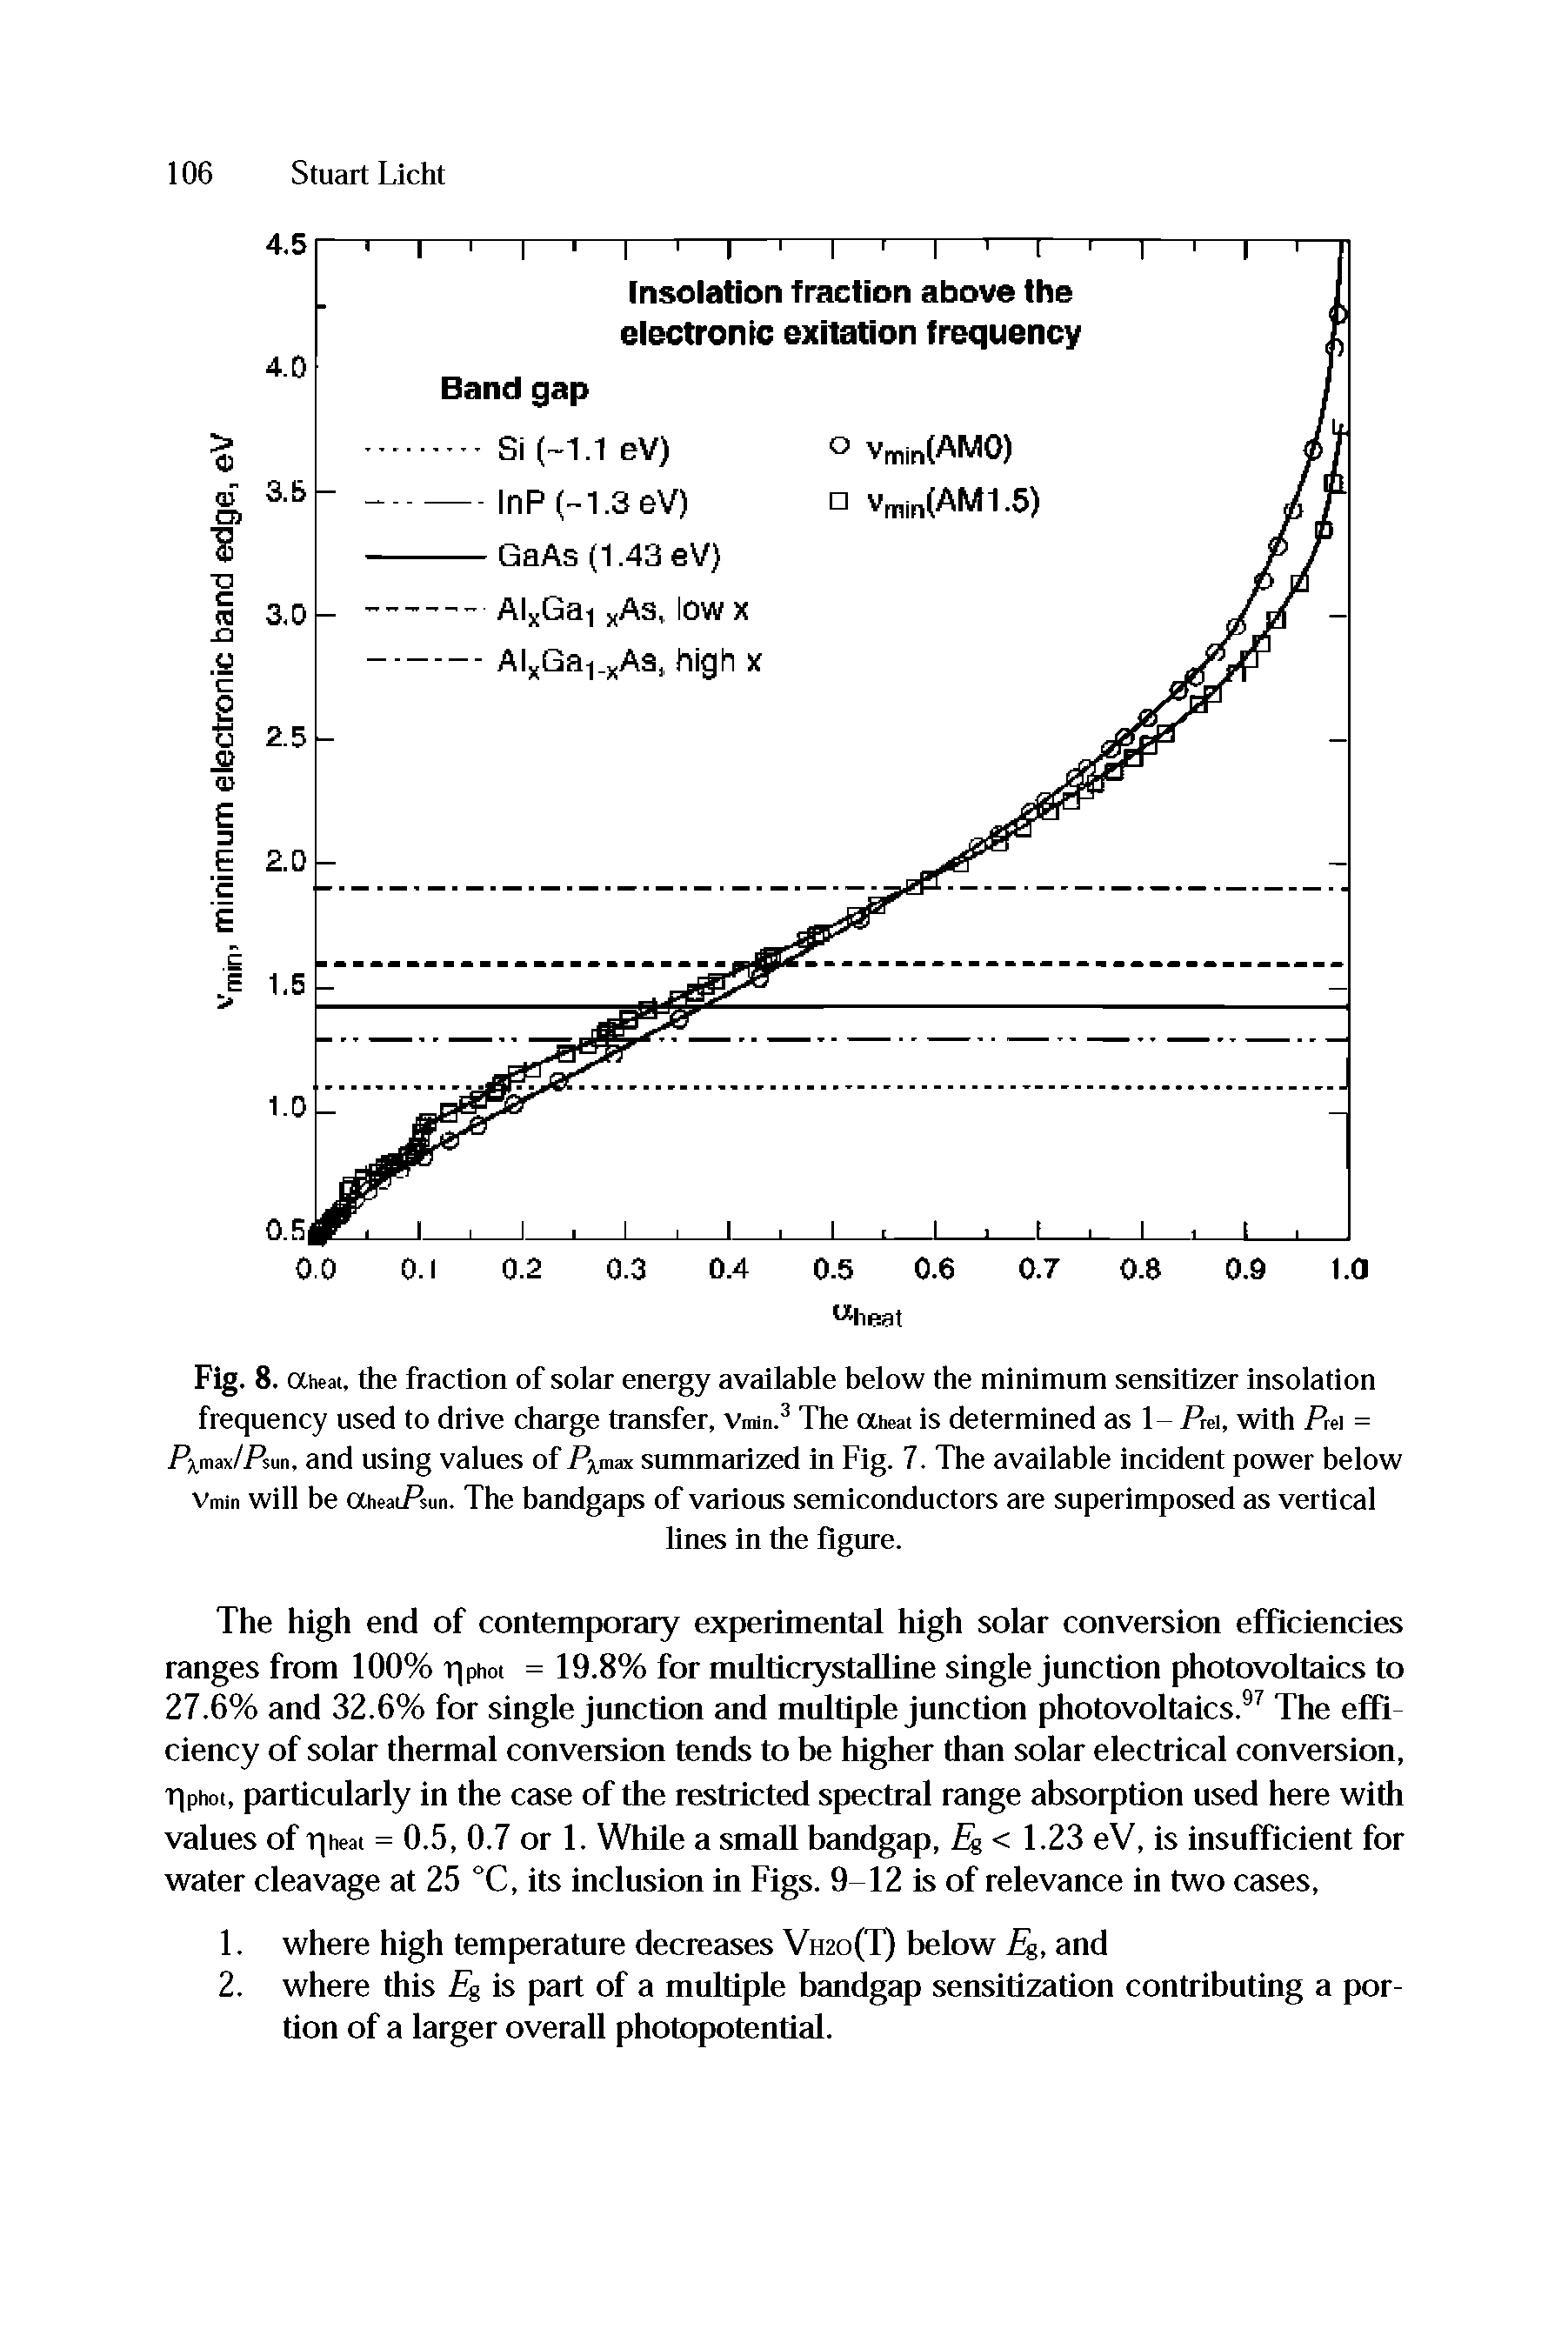 Fig. 8. aheat, the fraction of solar energy available below the minimum sensitizer insolation frequency used to drive charge transfer, Vmm.3 The aheat is determined as 1- Pm, with Prei = / max/Psun, and using values of 7 max summarized in Fig. 7. The available incident power below Vmin will be aheatPsun. The bandgaps of various semiconductors are superimposed as vertical...